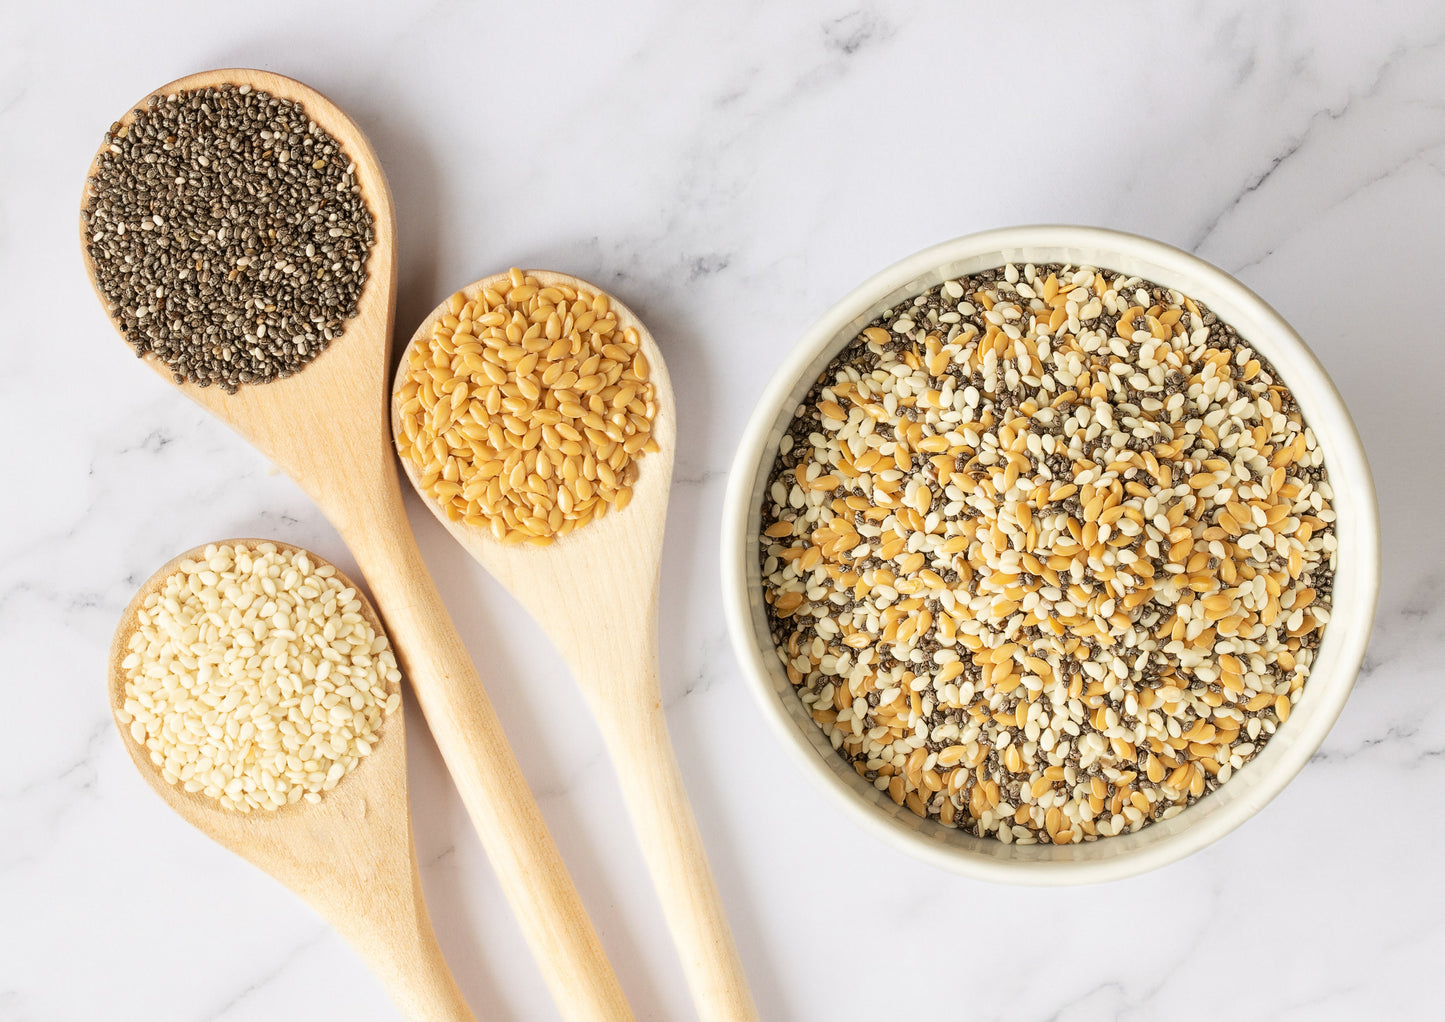 Organic Omega-3 Seeds Mix with Flax, Chia and Sesame, X Pounds - A Blend of Non-GMO Whole Seeds, Raw, Kosher, Vegan, Bulk. Rich in Omega 3 Fatty Acids and Dietary Fiber. Great for Salads and Oatmeal